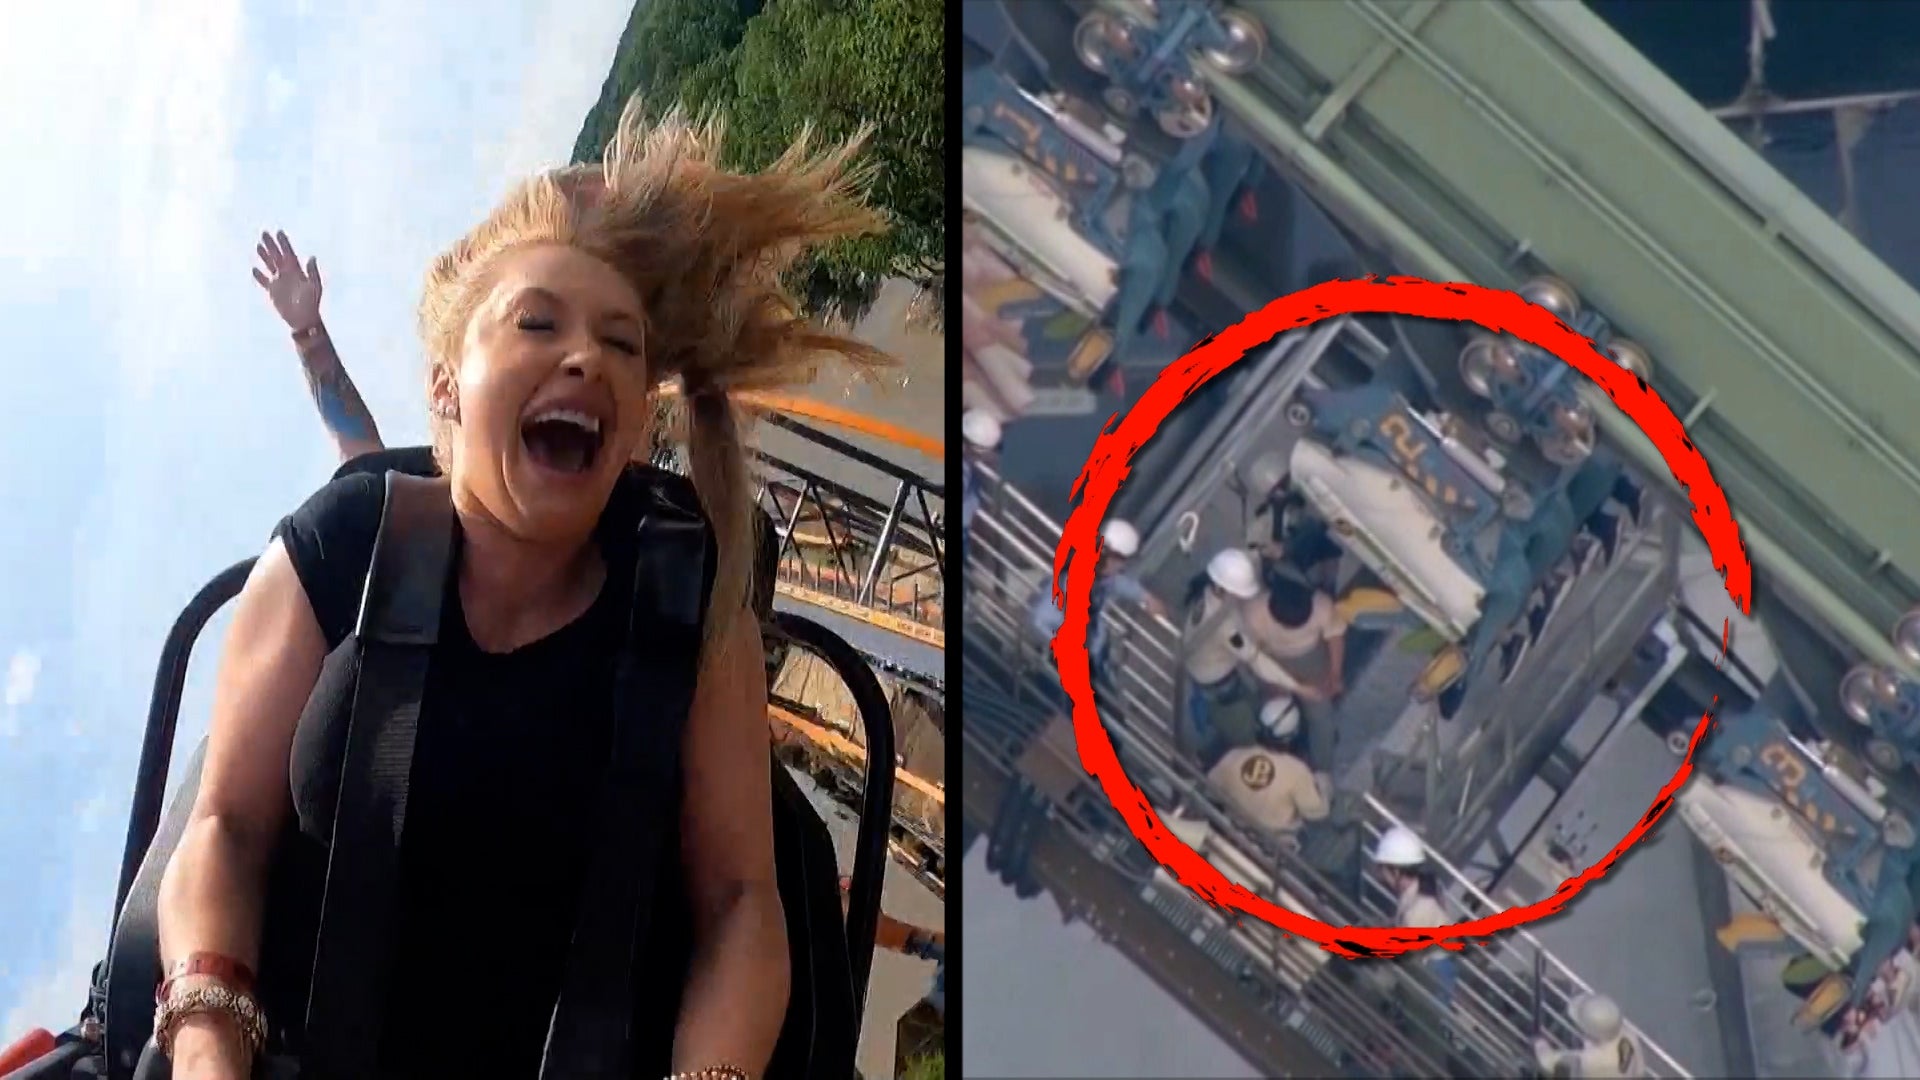 Naked Roller Coaster Rides and Other Unusual Amusement Parks Happenings |  Inside Edition